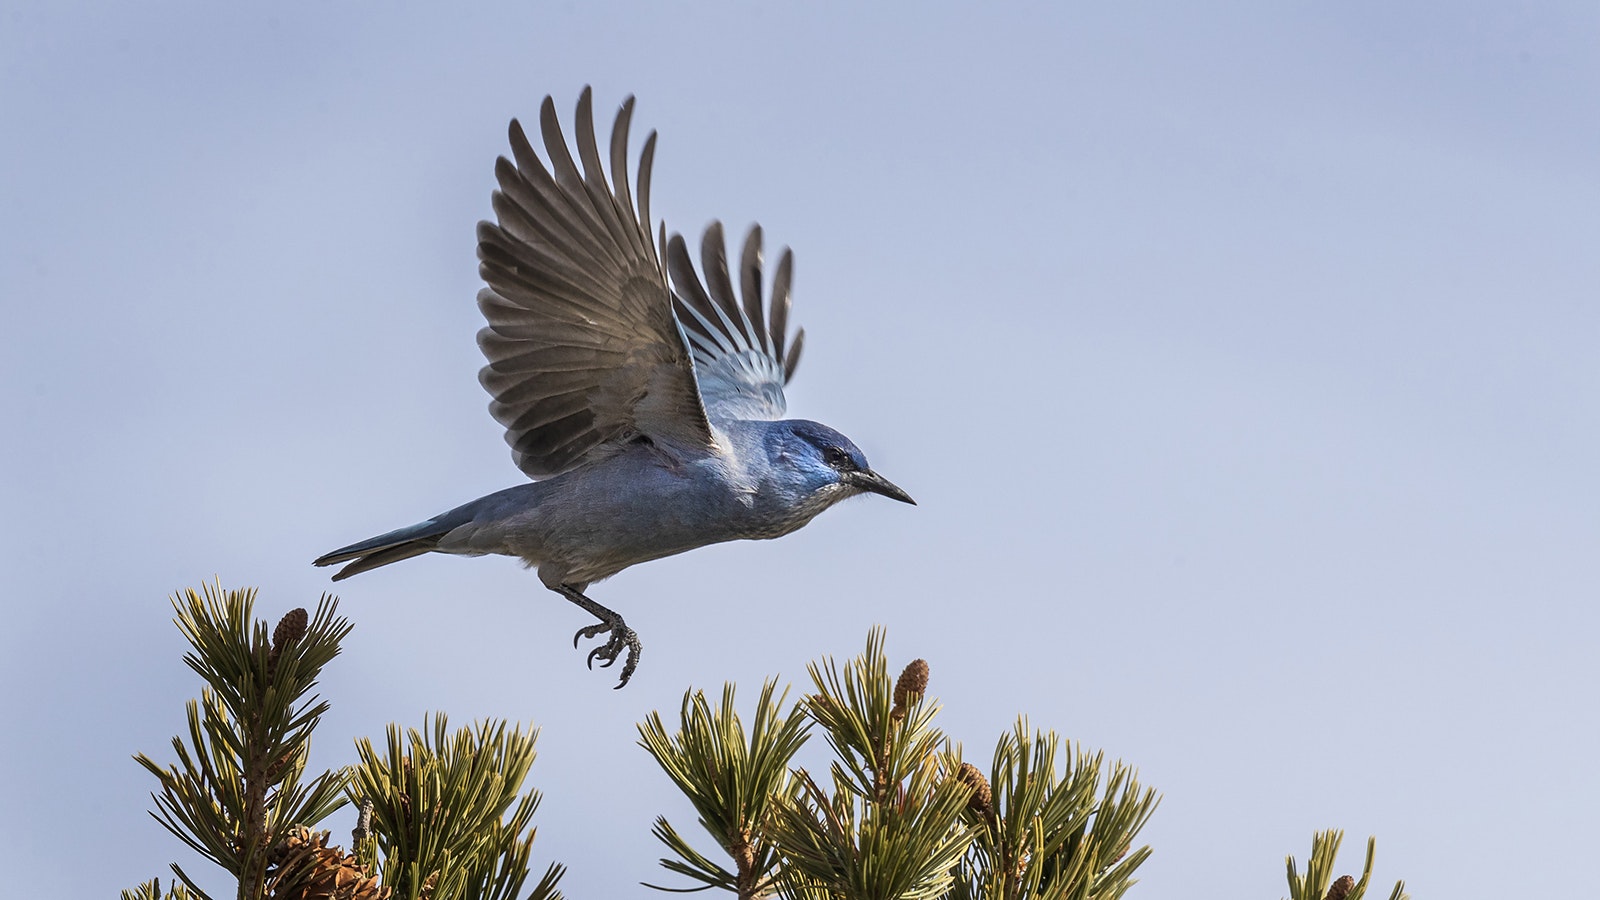 The noisy, gregarious pinyon jay breed and forage together in colonies that can range in size from a dozen to hundreds of individuals.